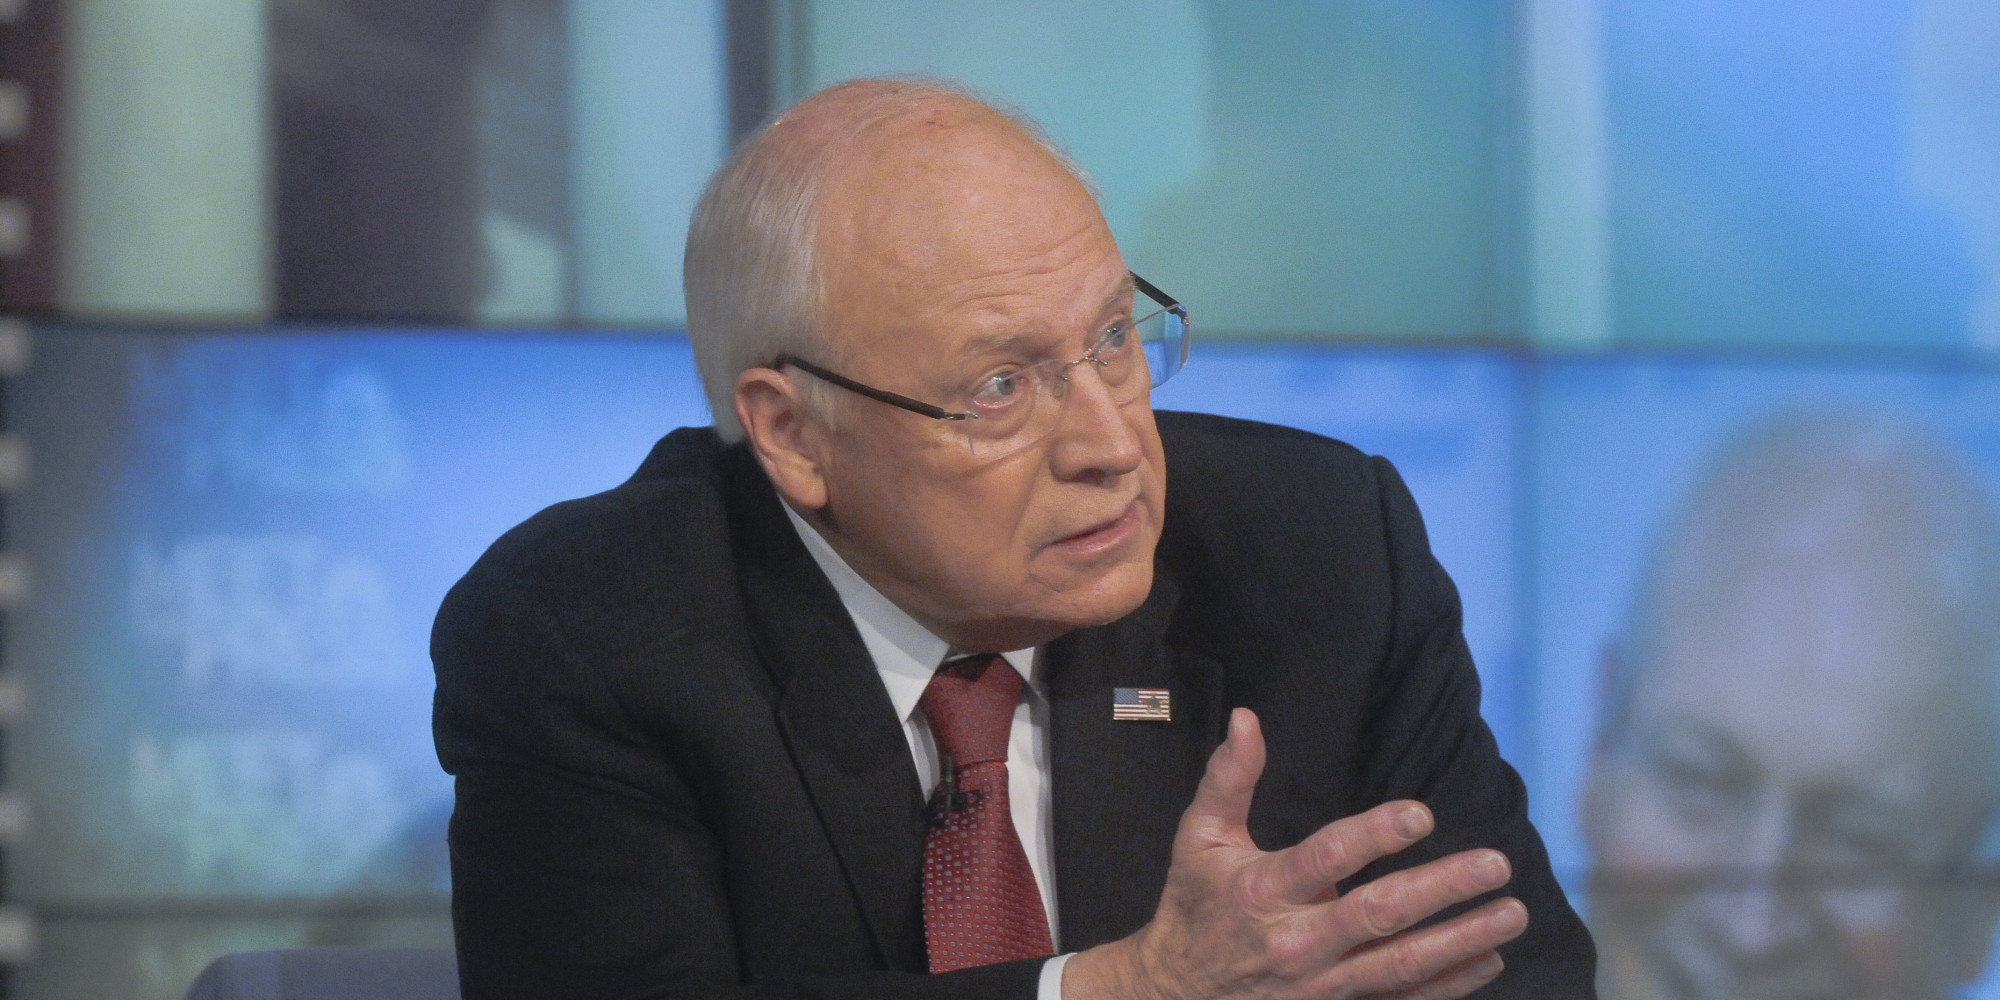 cheney face Dick s